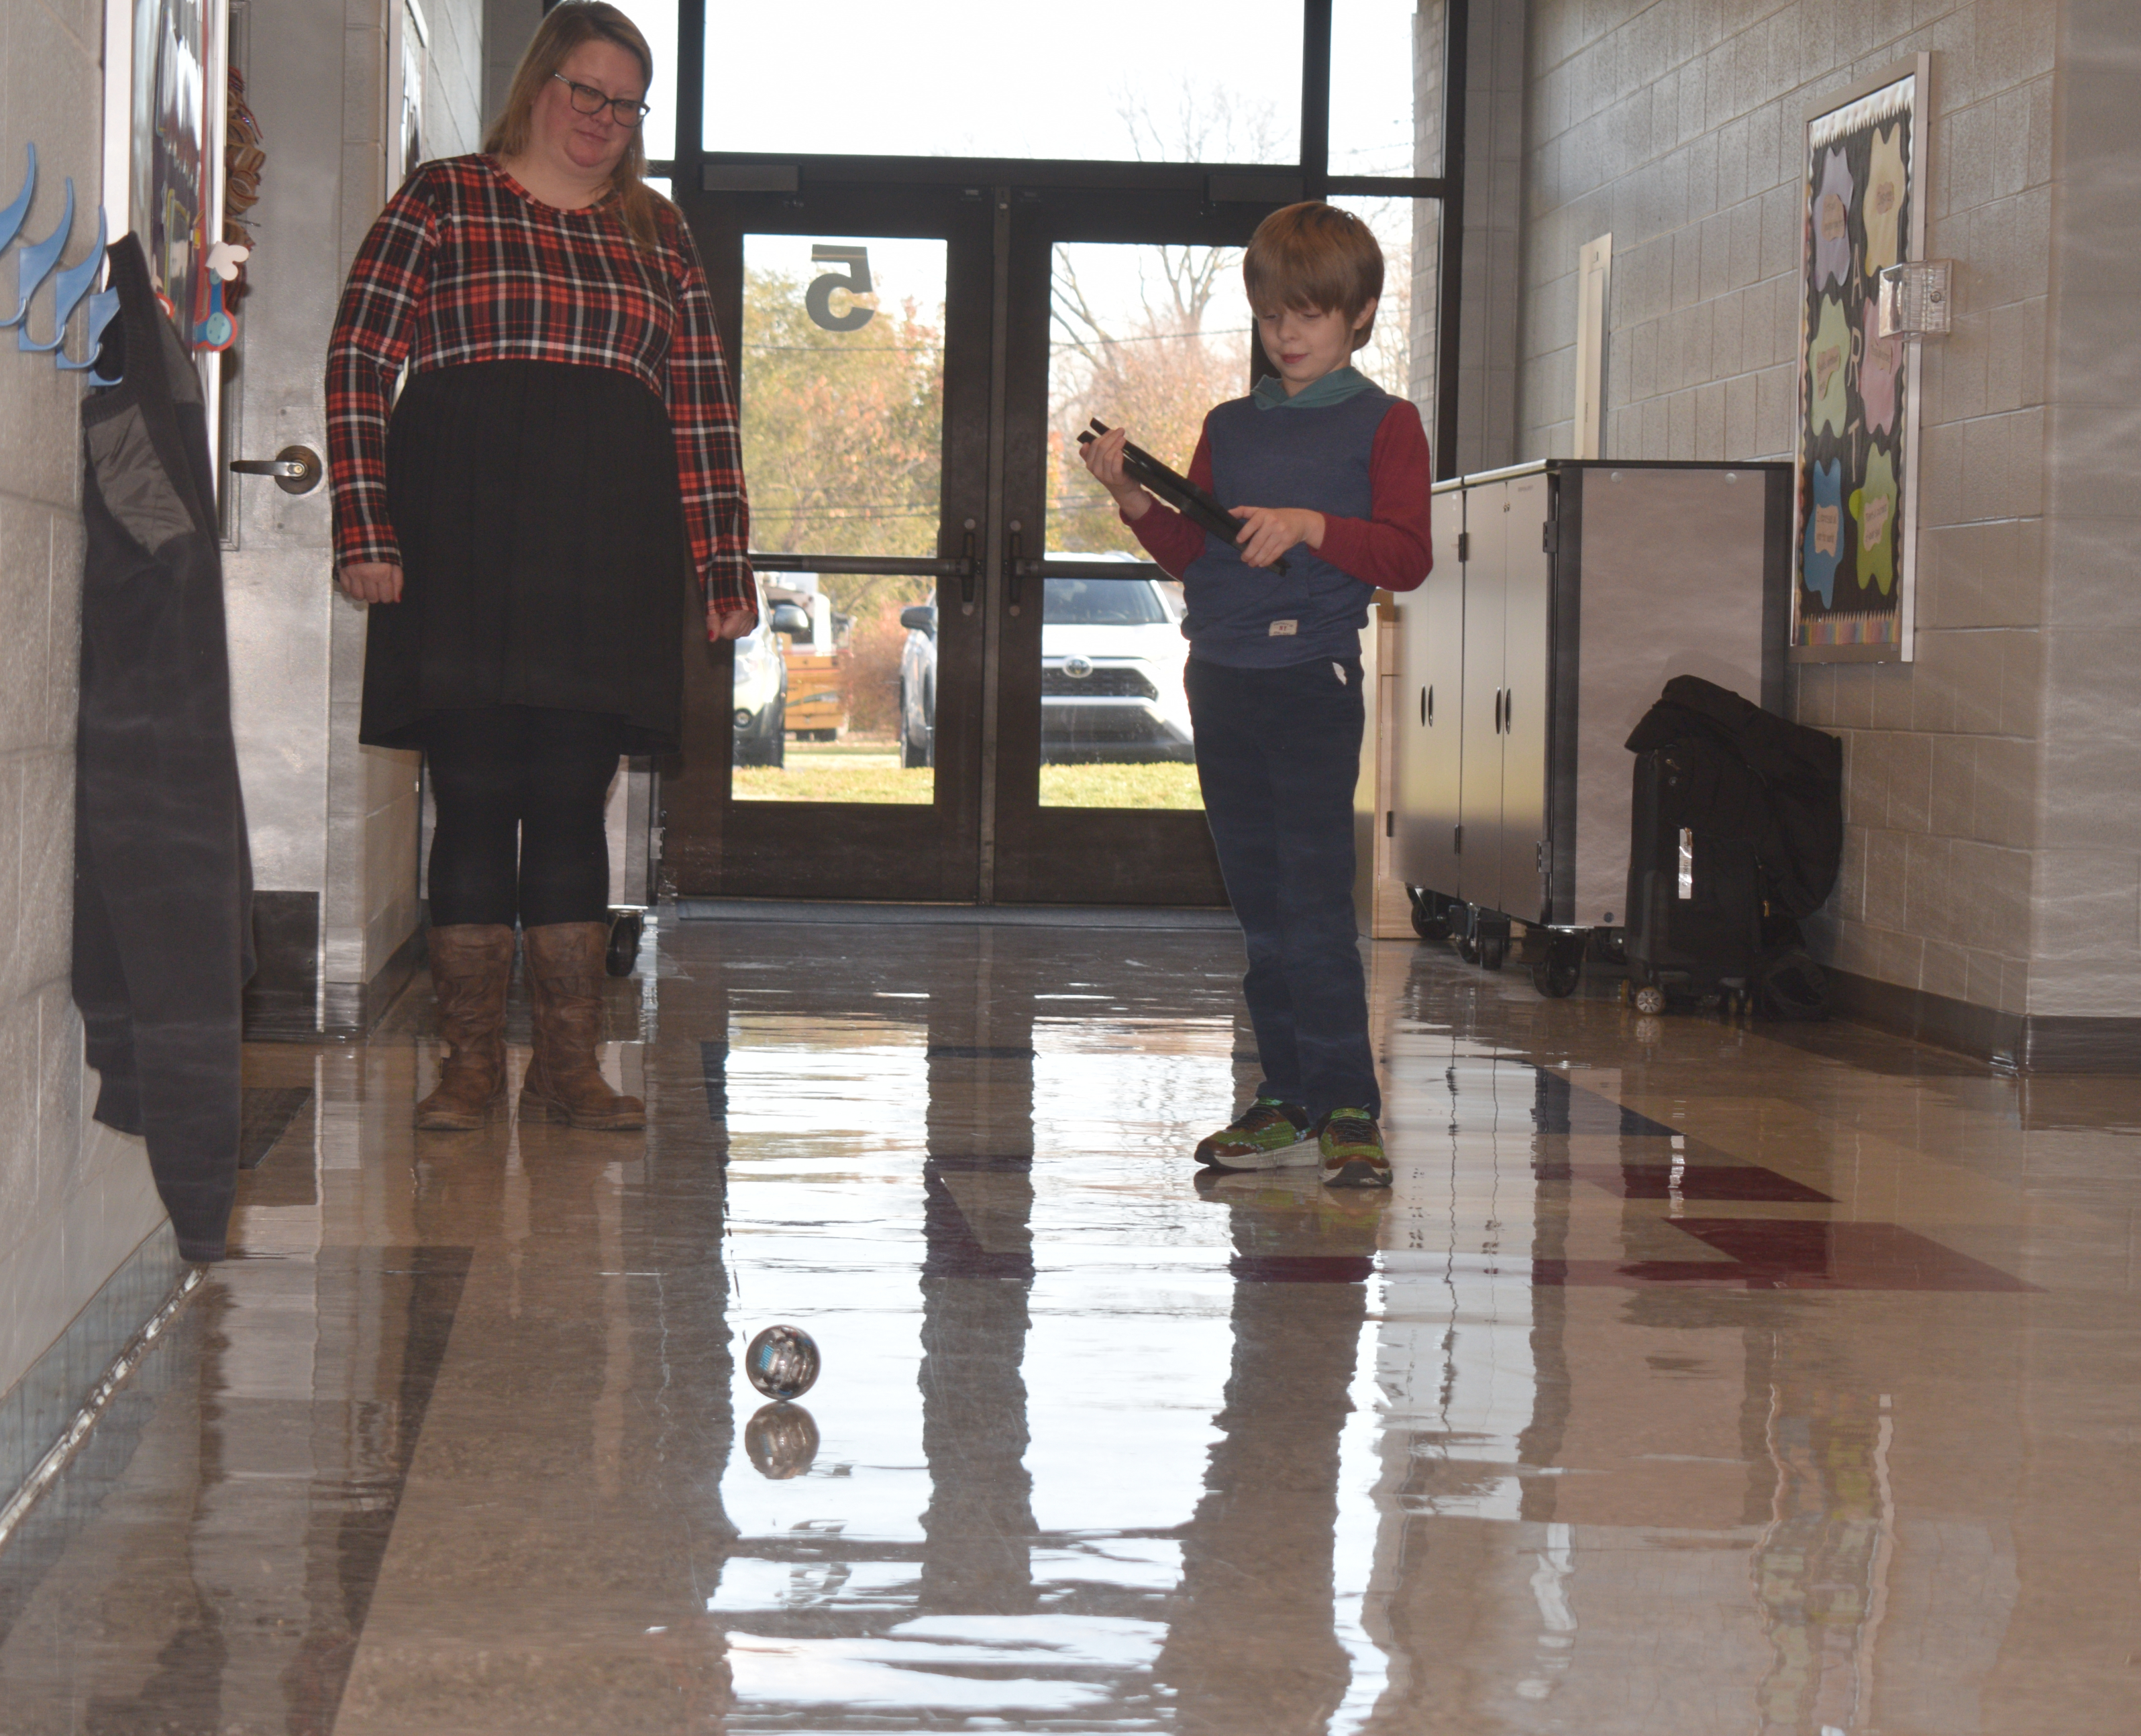 A male student holding a laptop interacts with a Sphero BOLT Coding Robot in a hallway at Tecumseh-Harrison School.